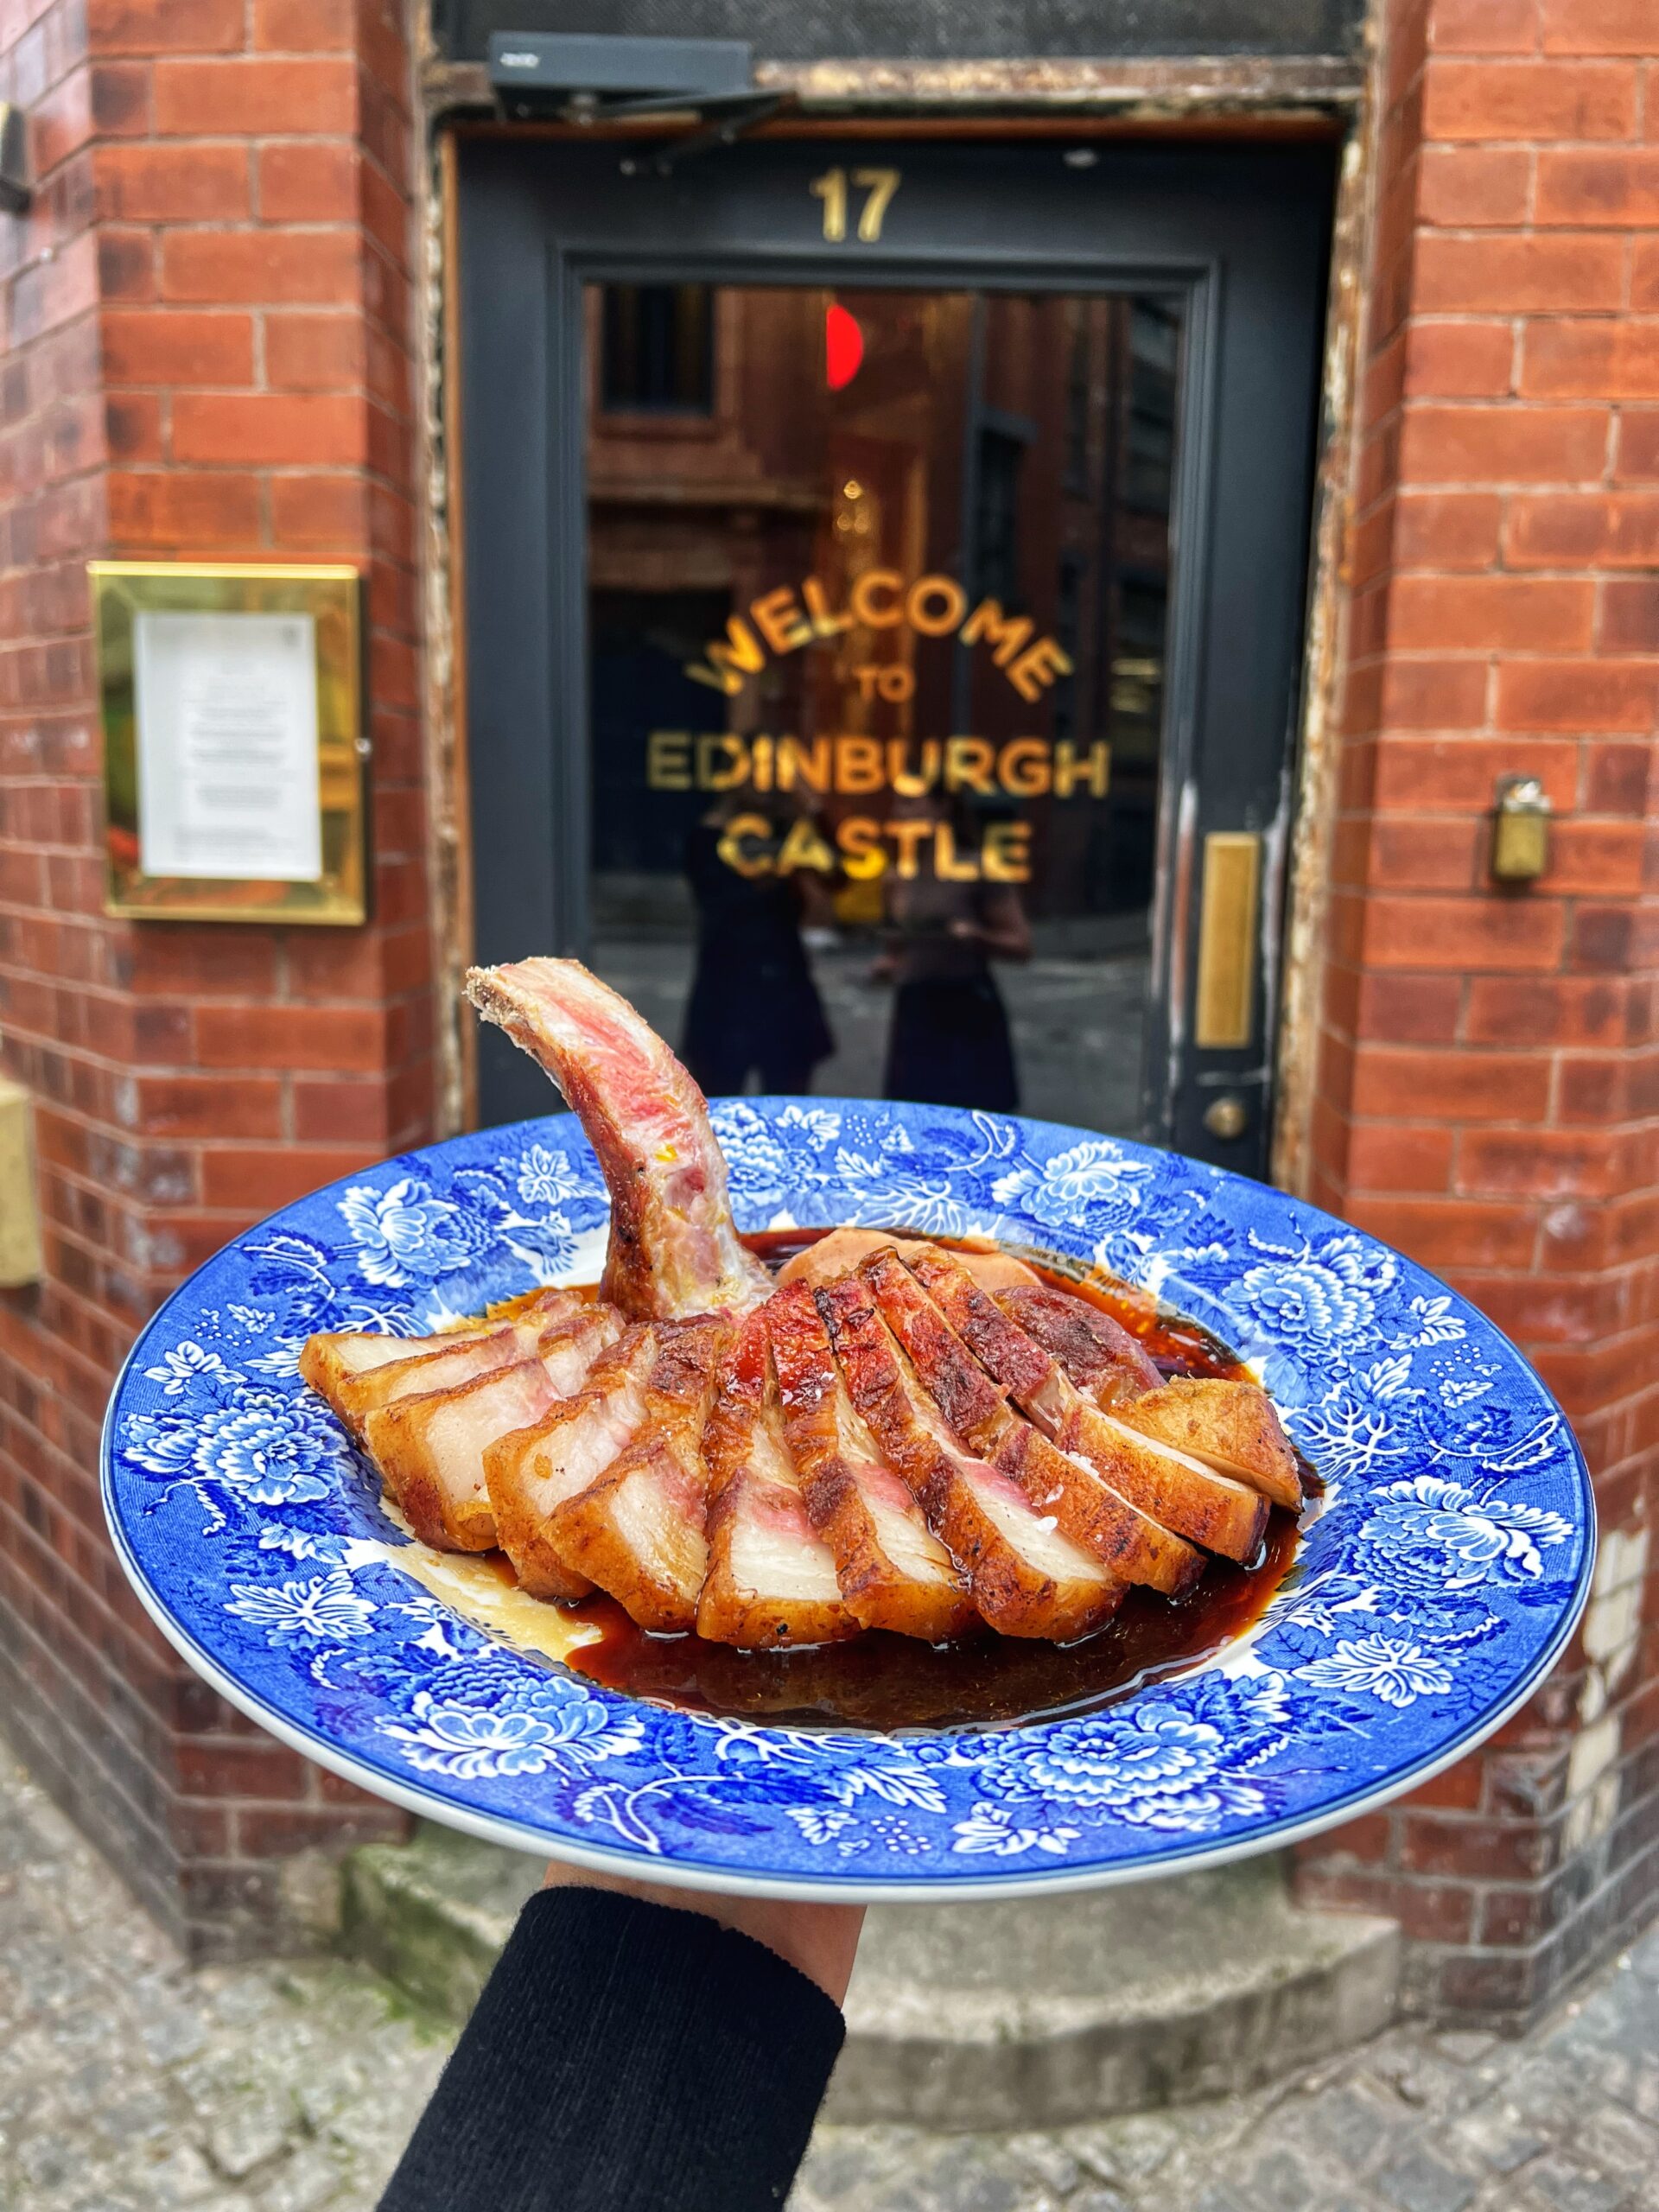 The Edinburgh Castle pub in Ancoats has been named one of the best gastropubs in the UK. Credit: The Manc Group